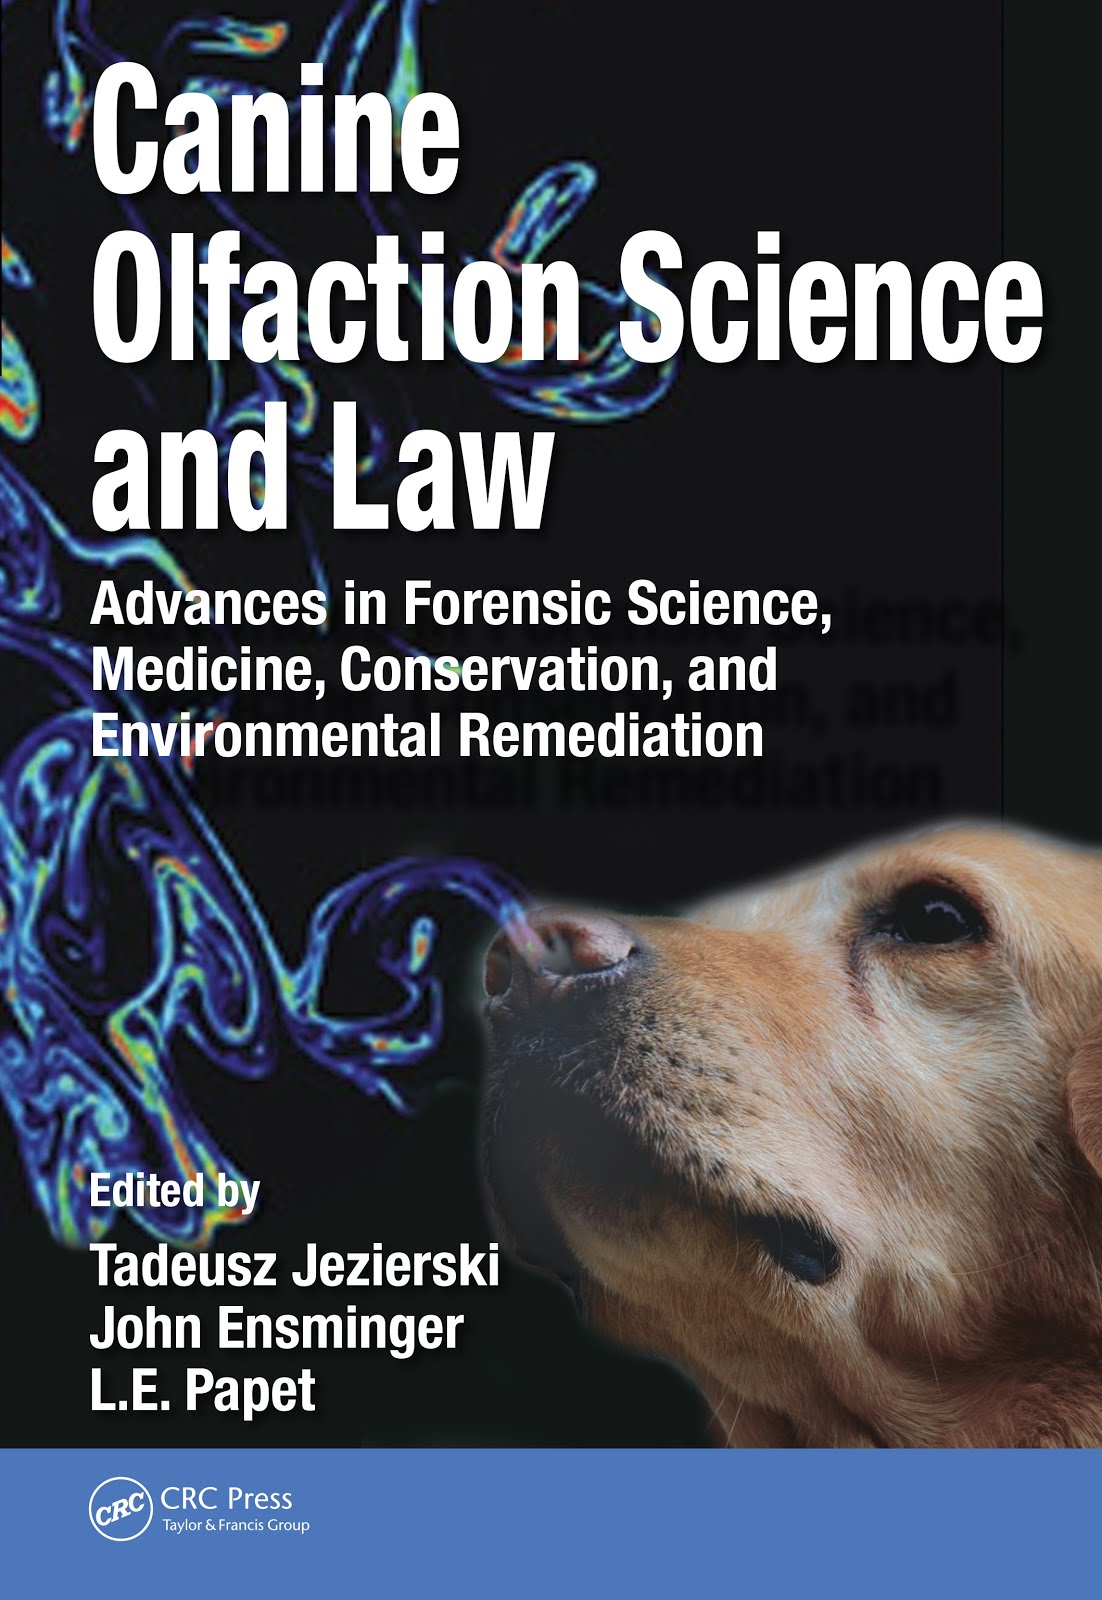 New Book on Canine Olfaction